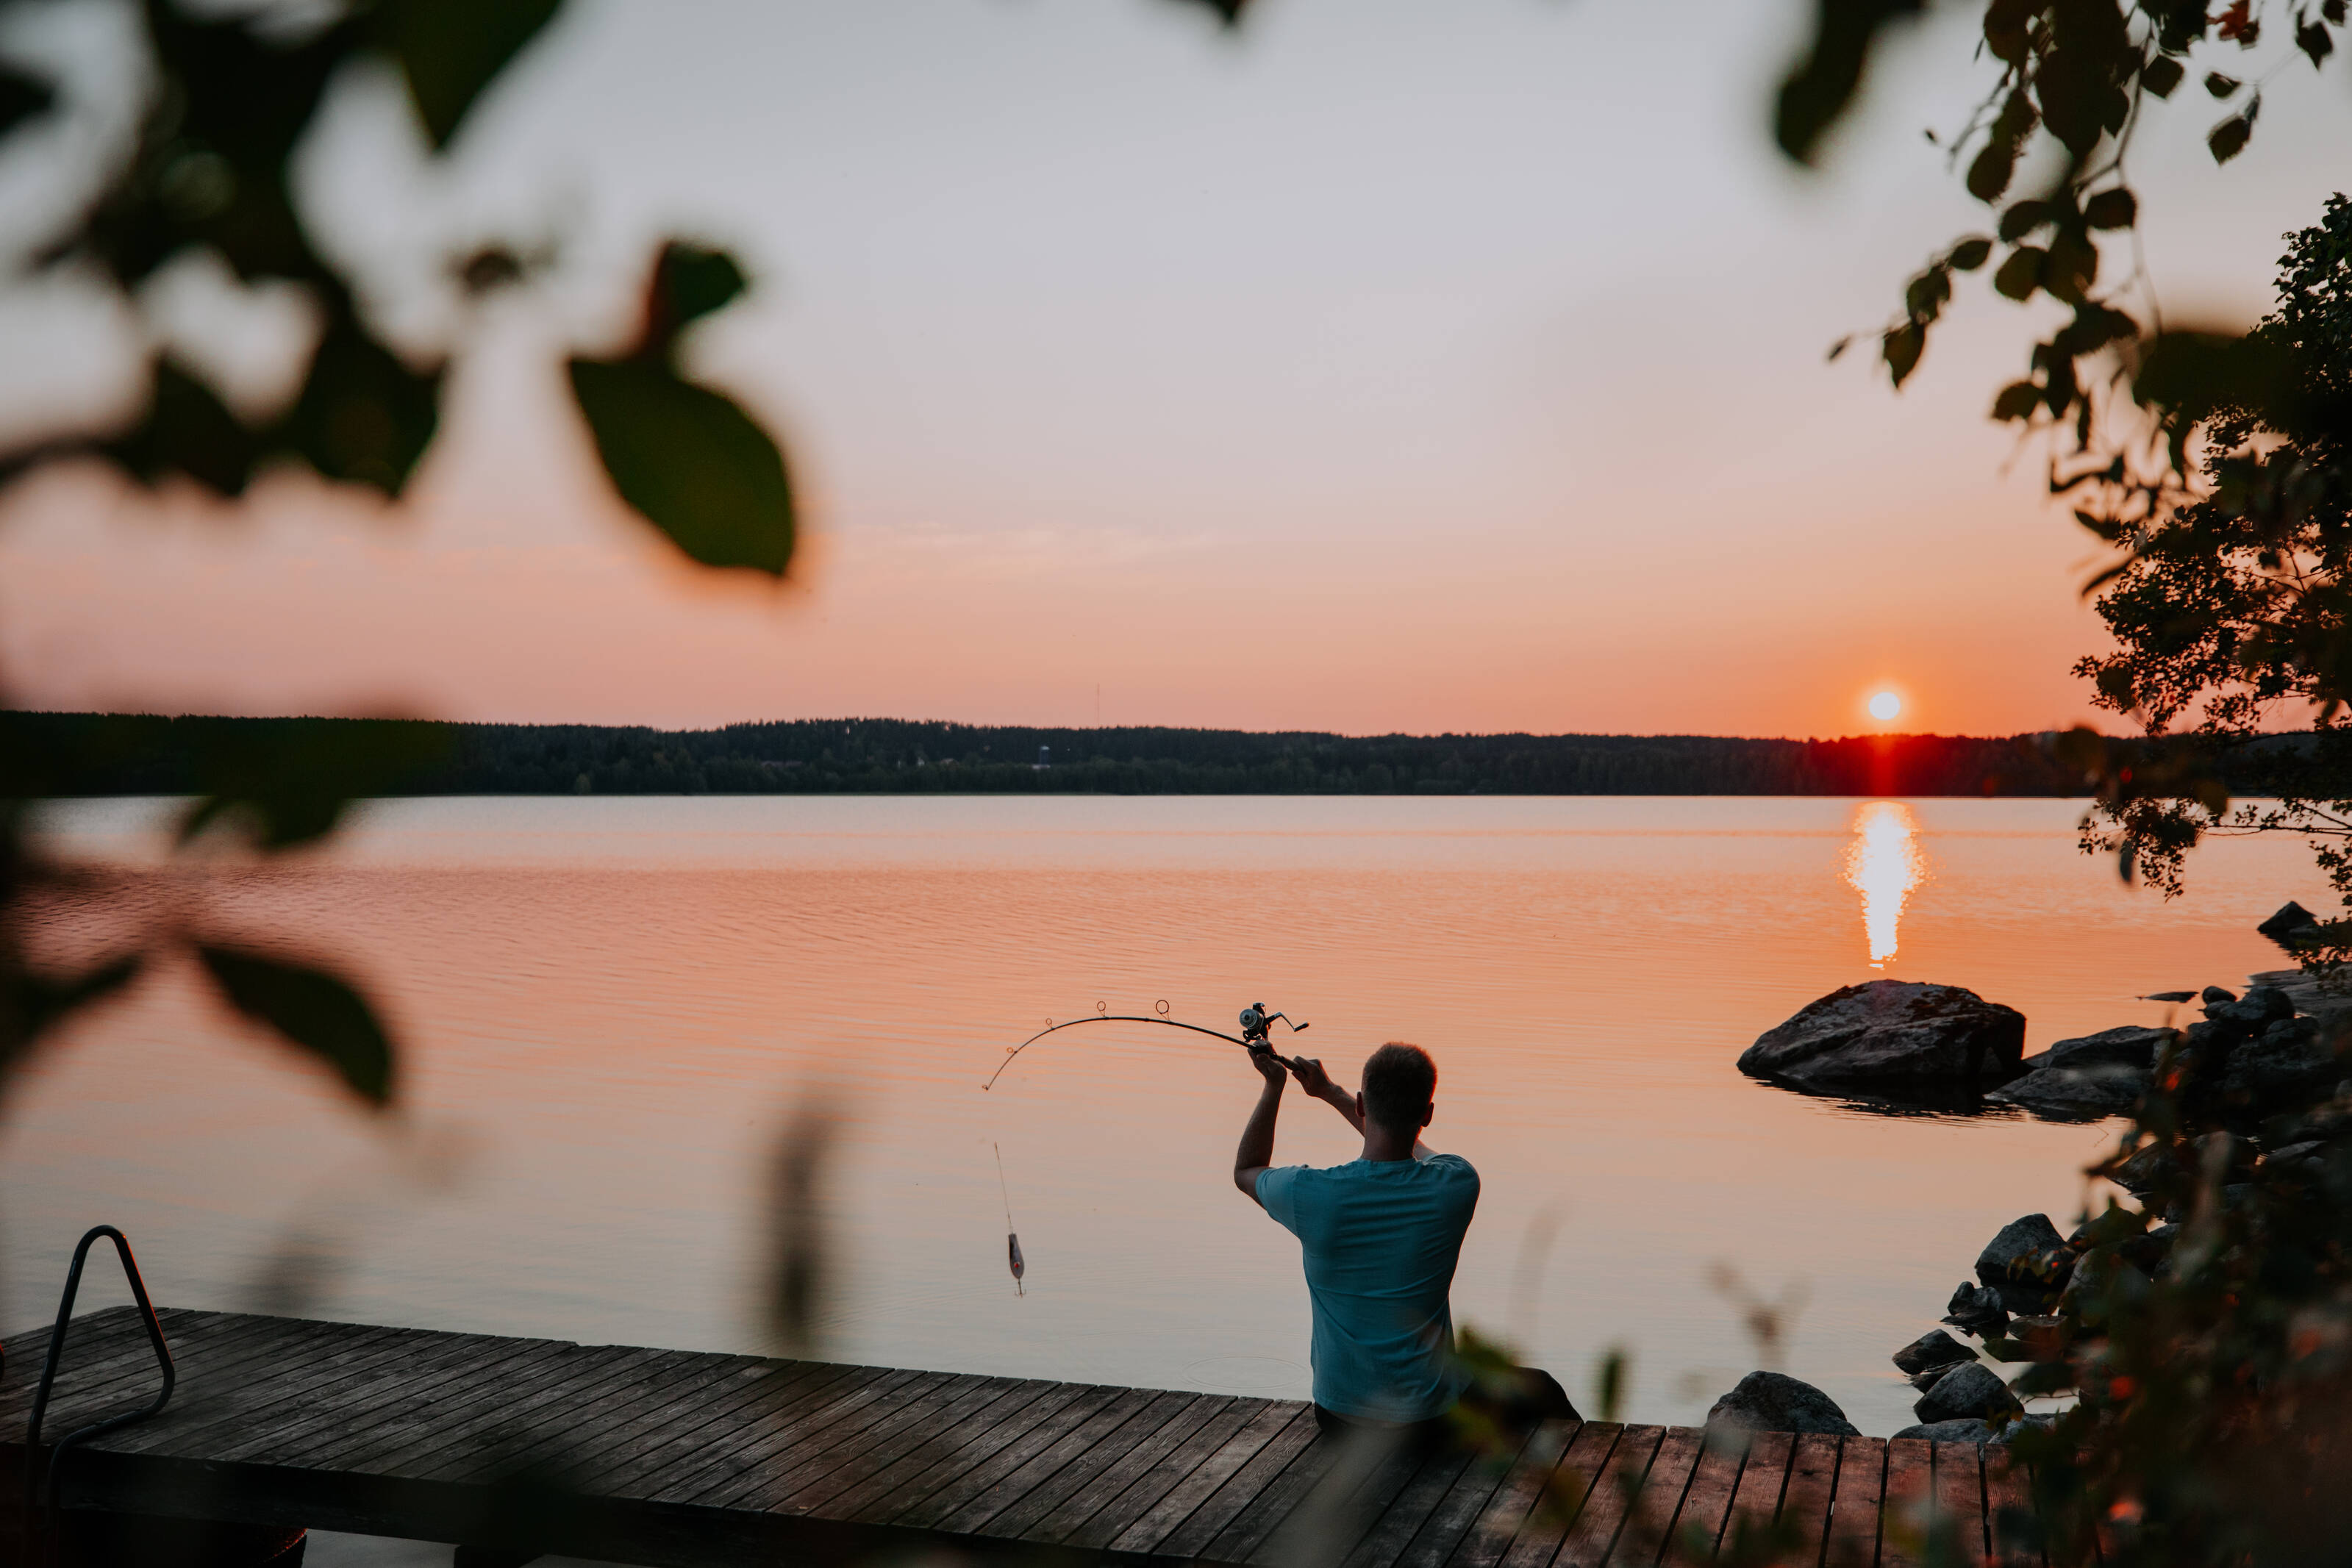 A man casts a fishing line from the dock during a Lake Lehmonkarki sunset.